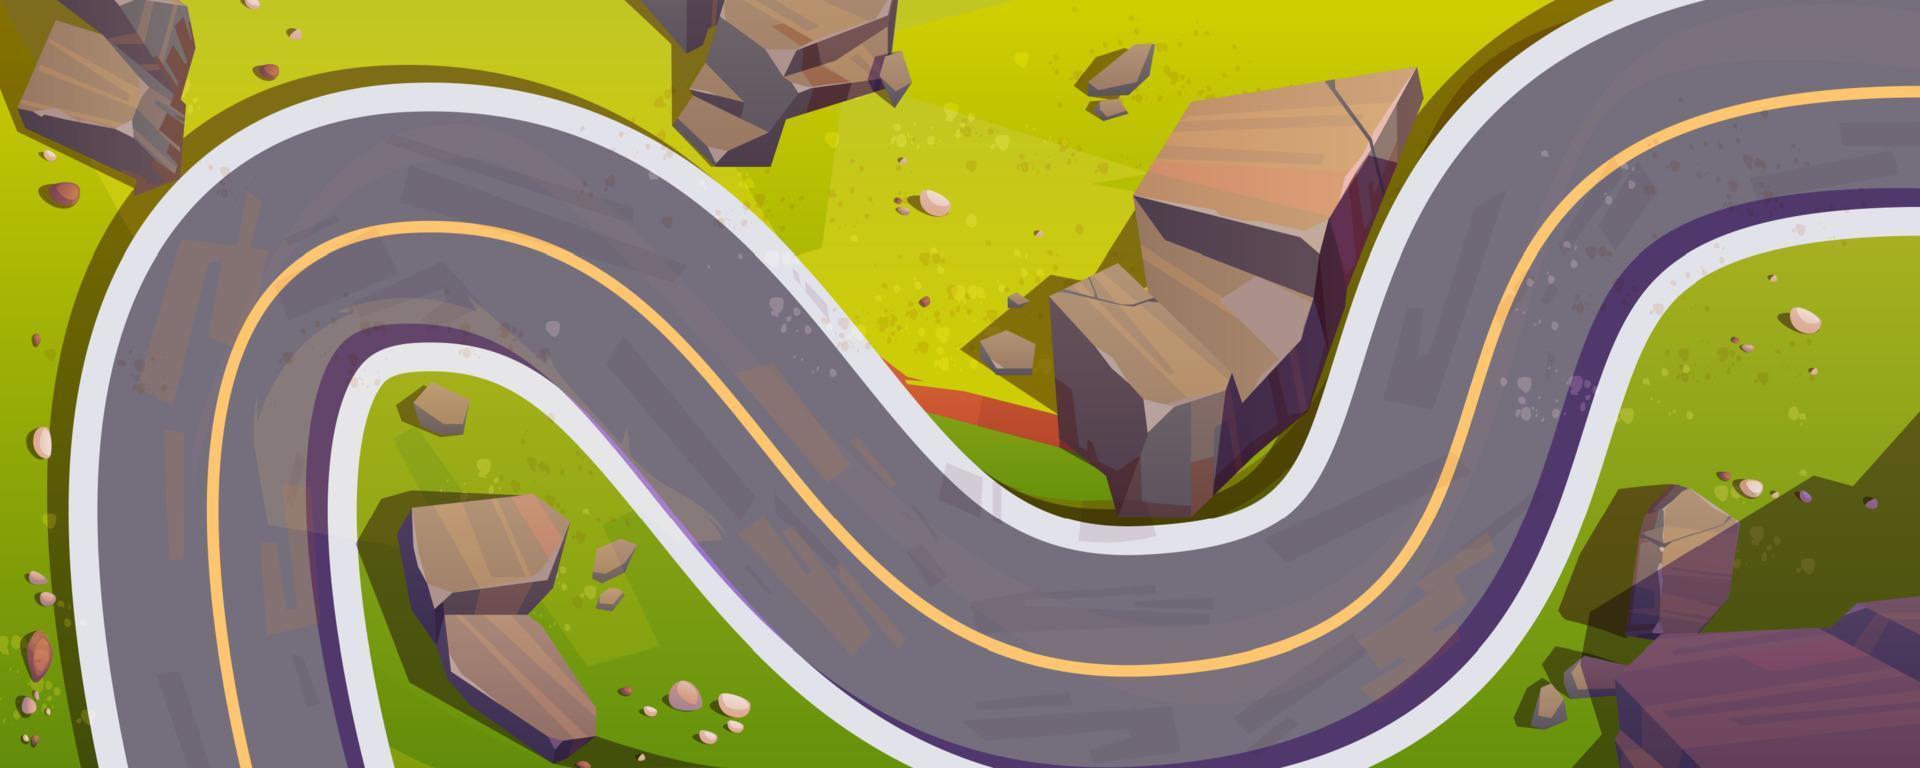 Top view of winding car road, mountain serpentine vector